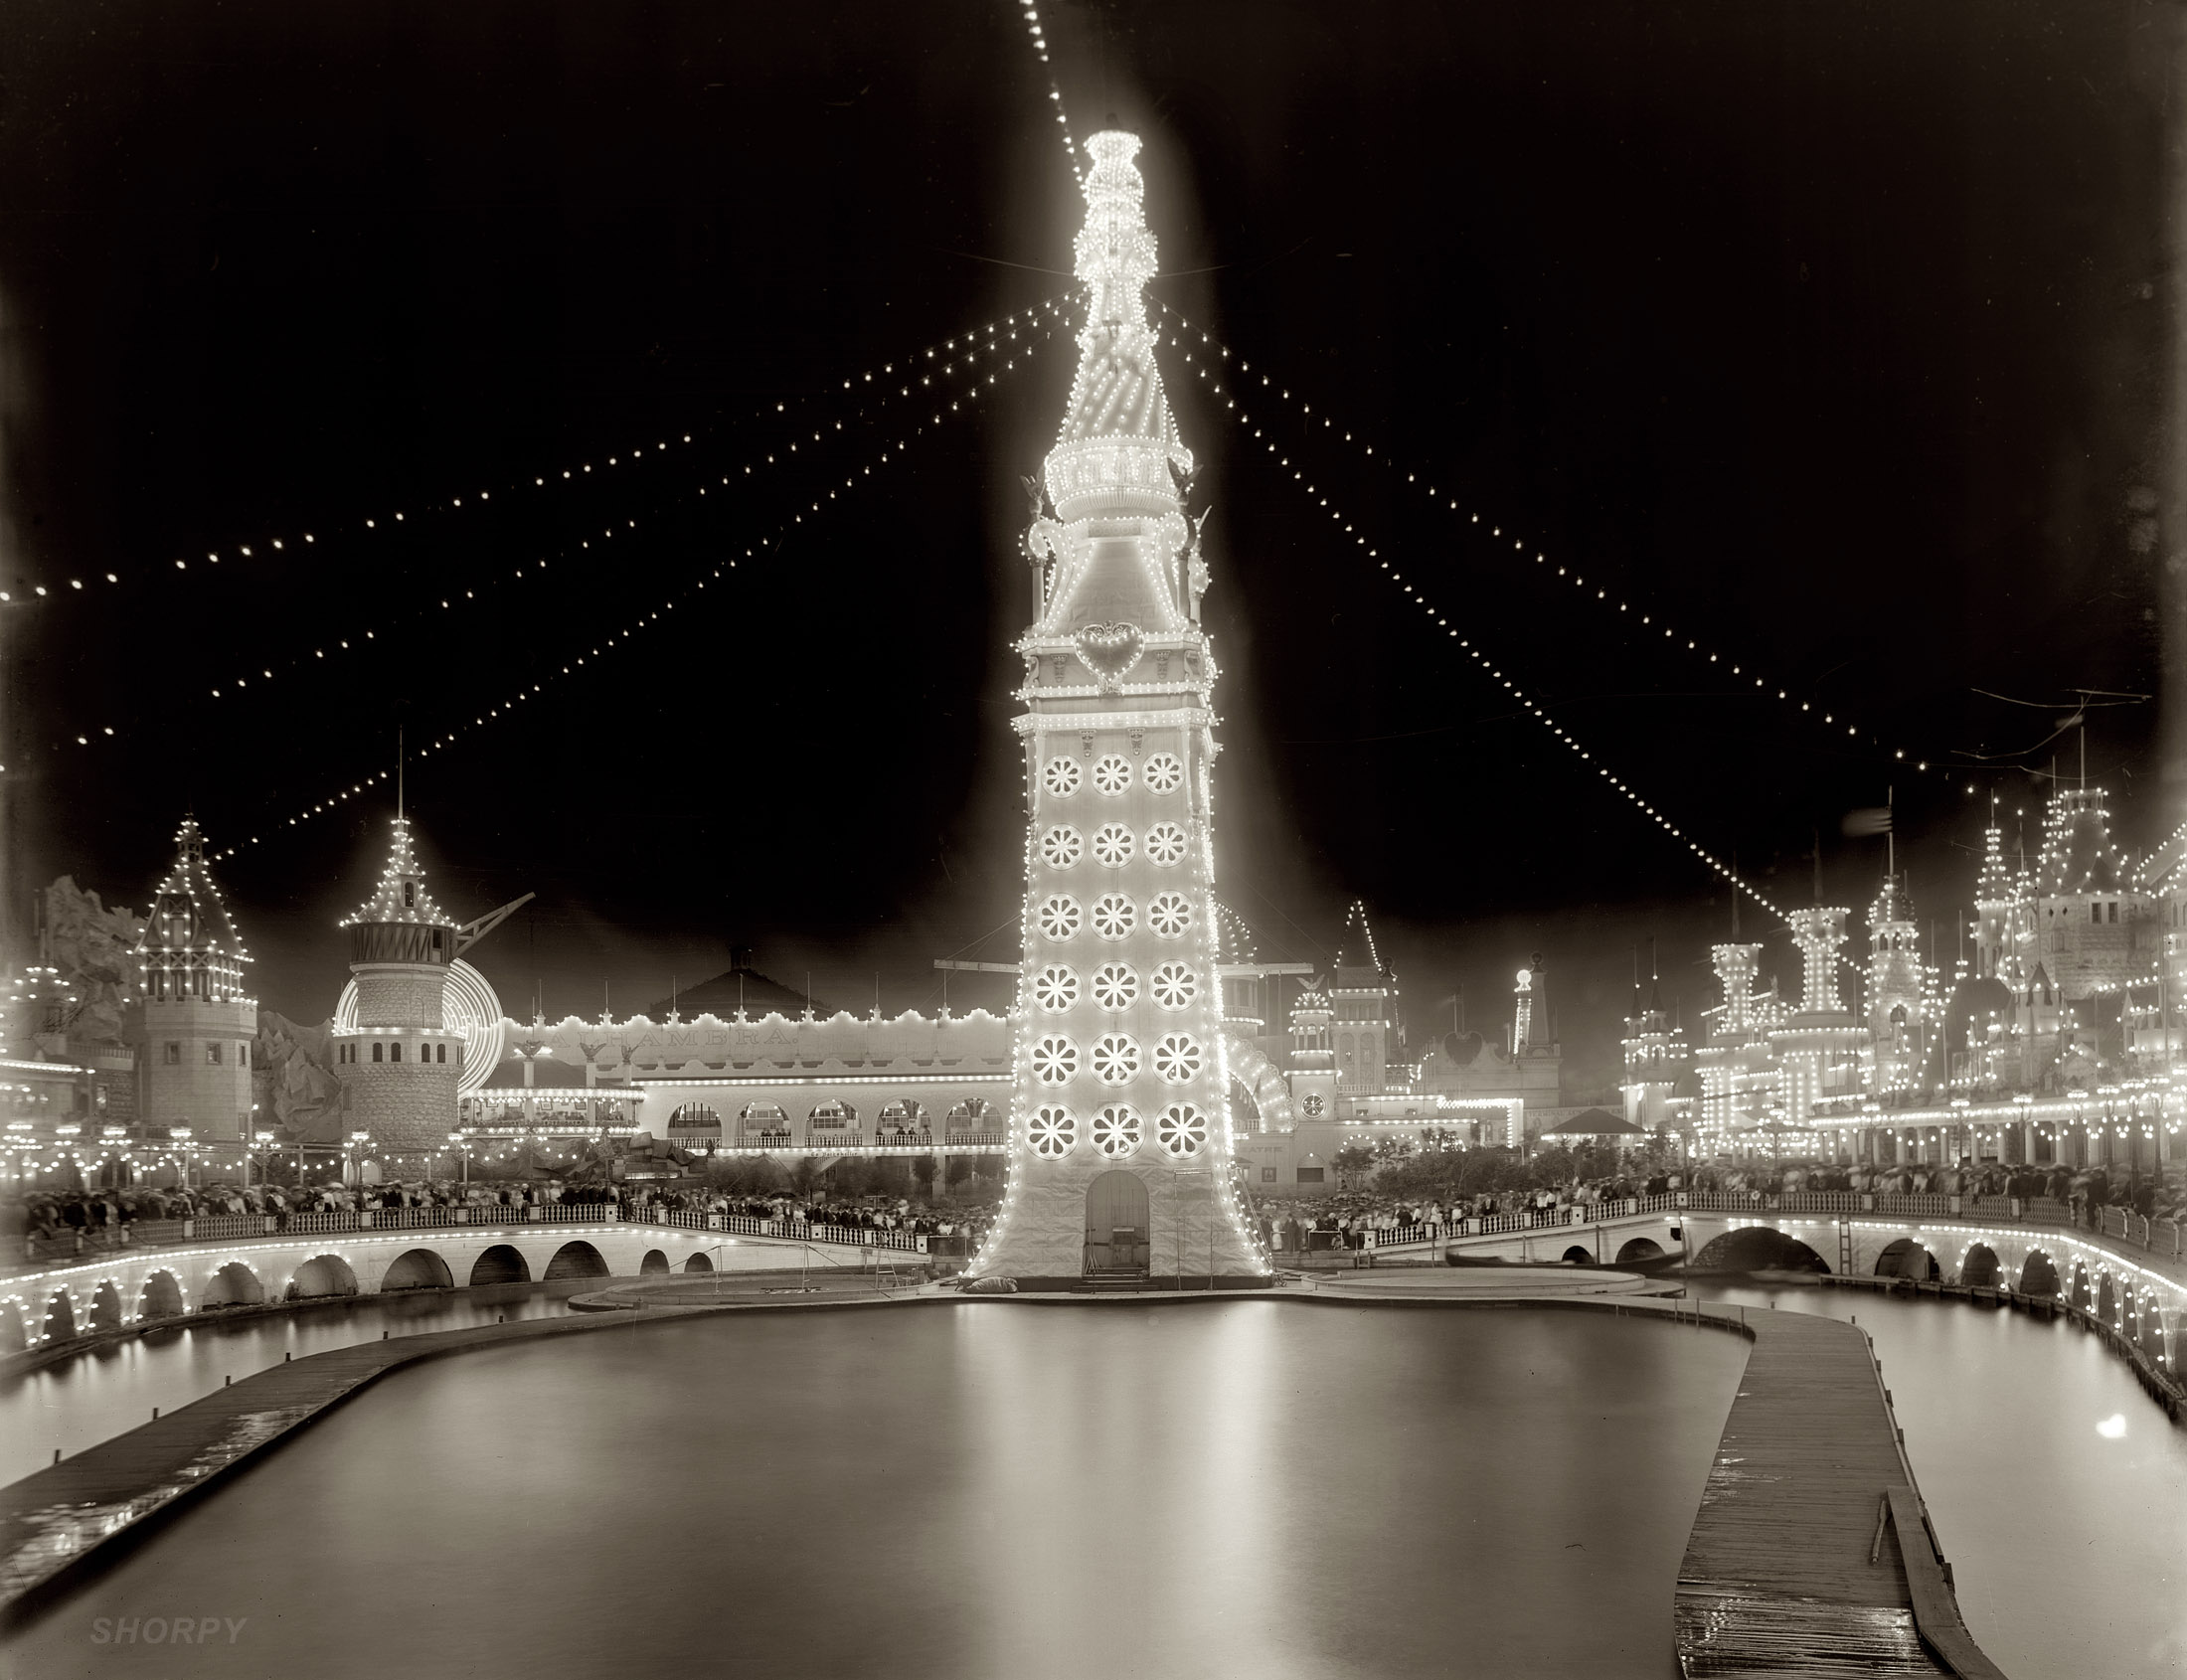 "Luna Park at Night." Coney Island circa 1905. Time exposure on an 8x10 glass negative. Detroit Publishing Company, Library of Congress. View full size.